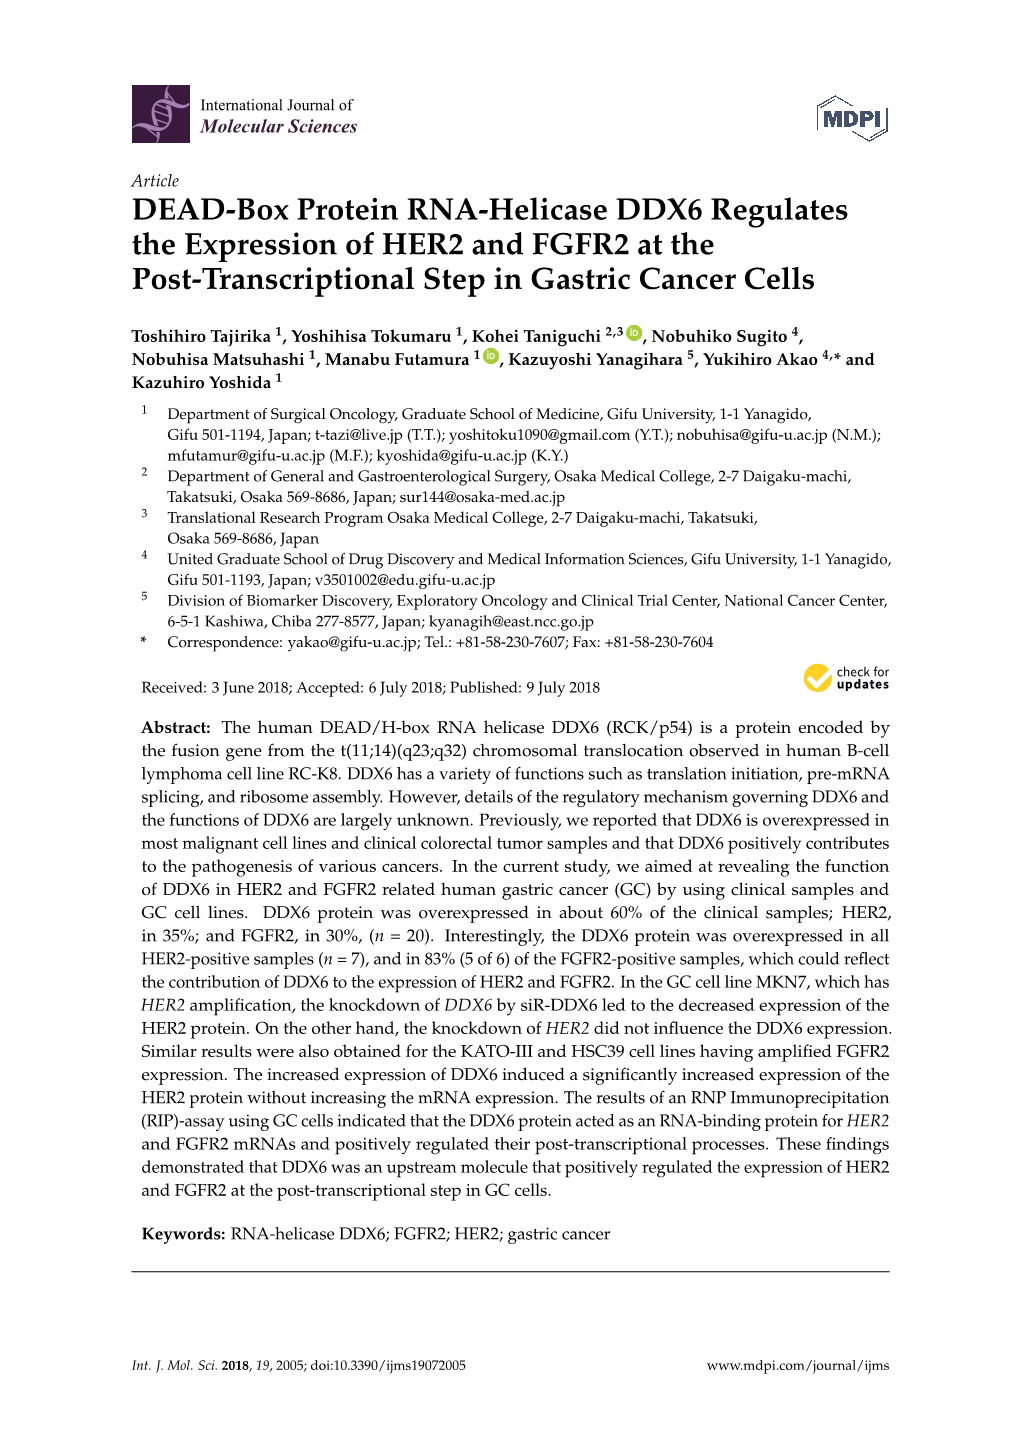 DEAD-Box Protein RNA-Helicase DDX6 Regulates the Expression of HER2 and FGFR2 at the Post-Transcriptional Step in Gastric Cancer Cells